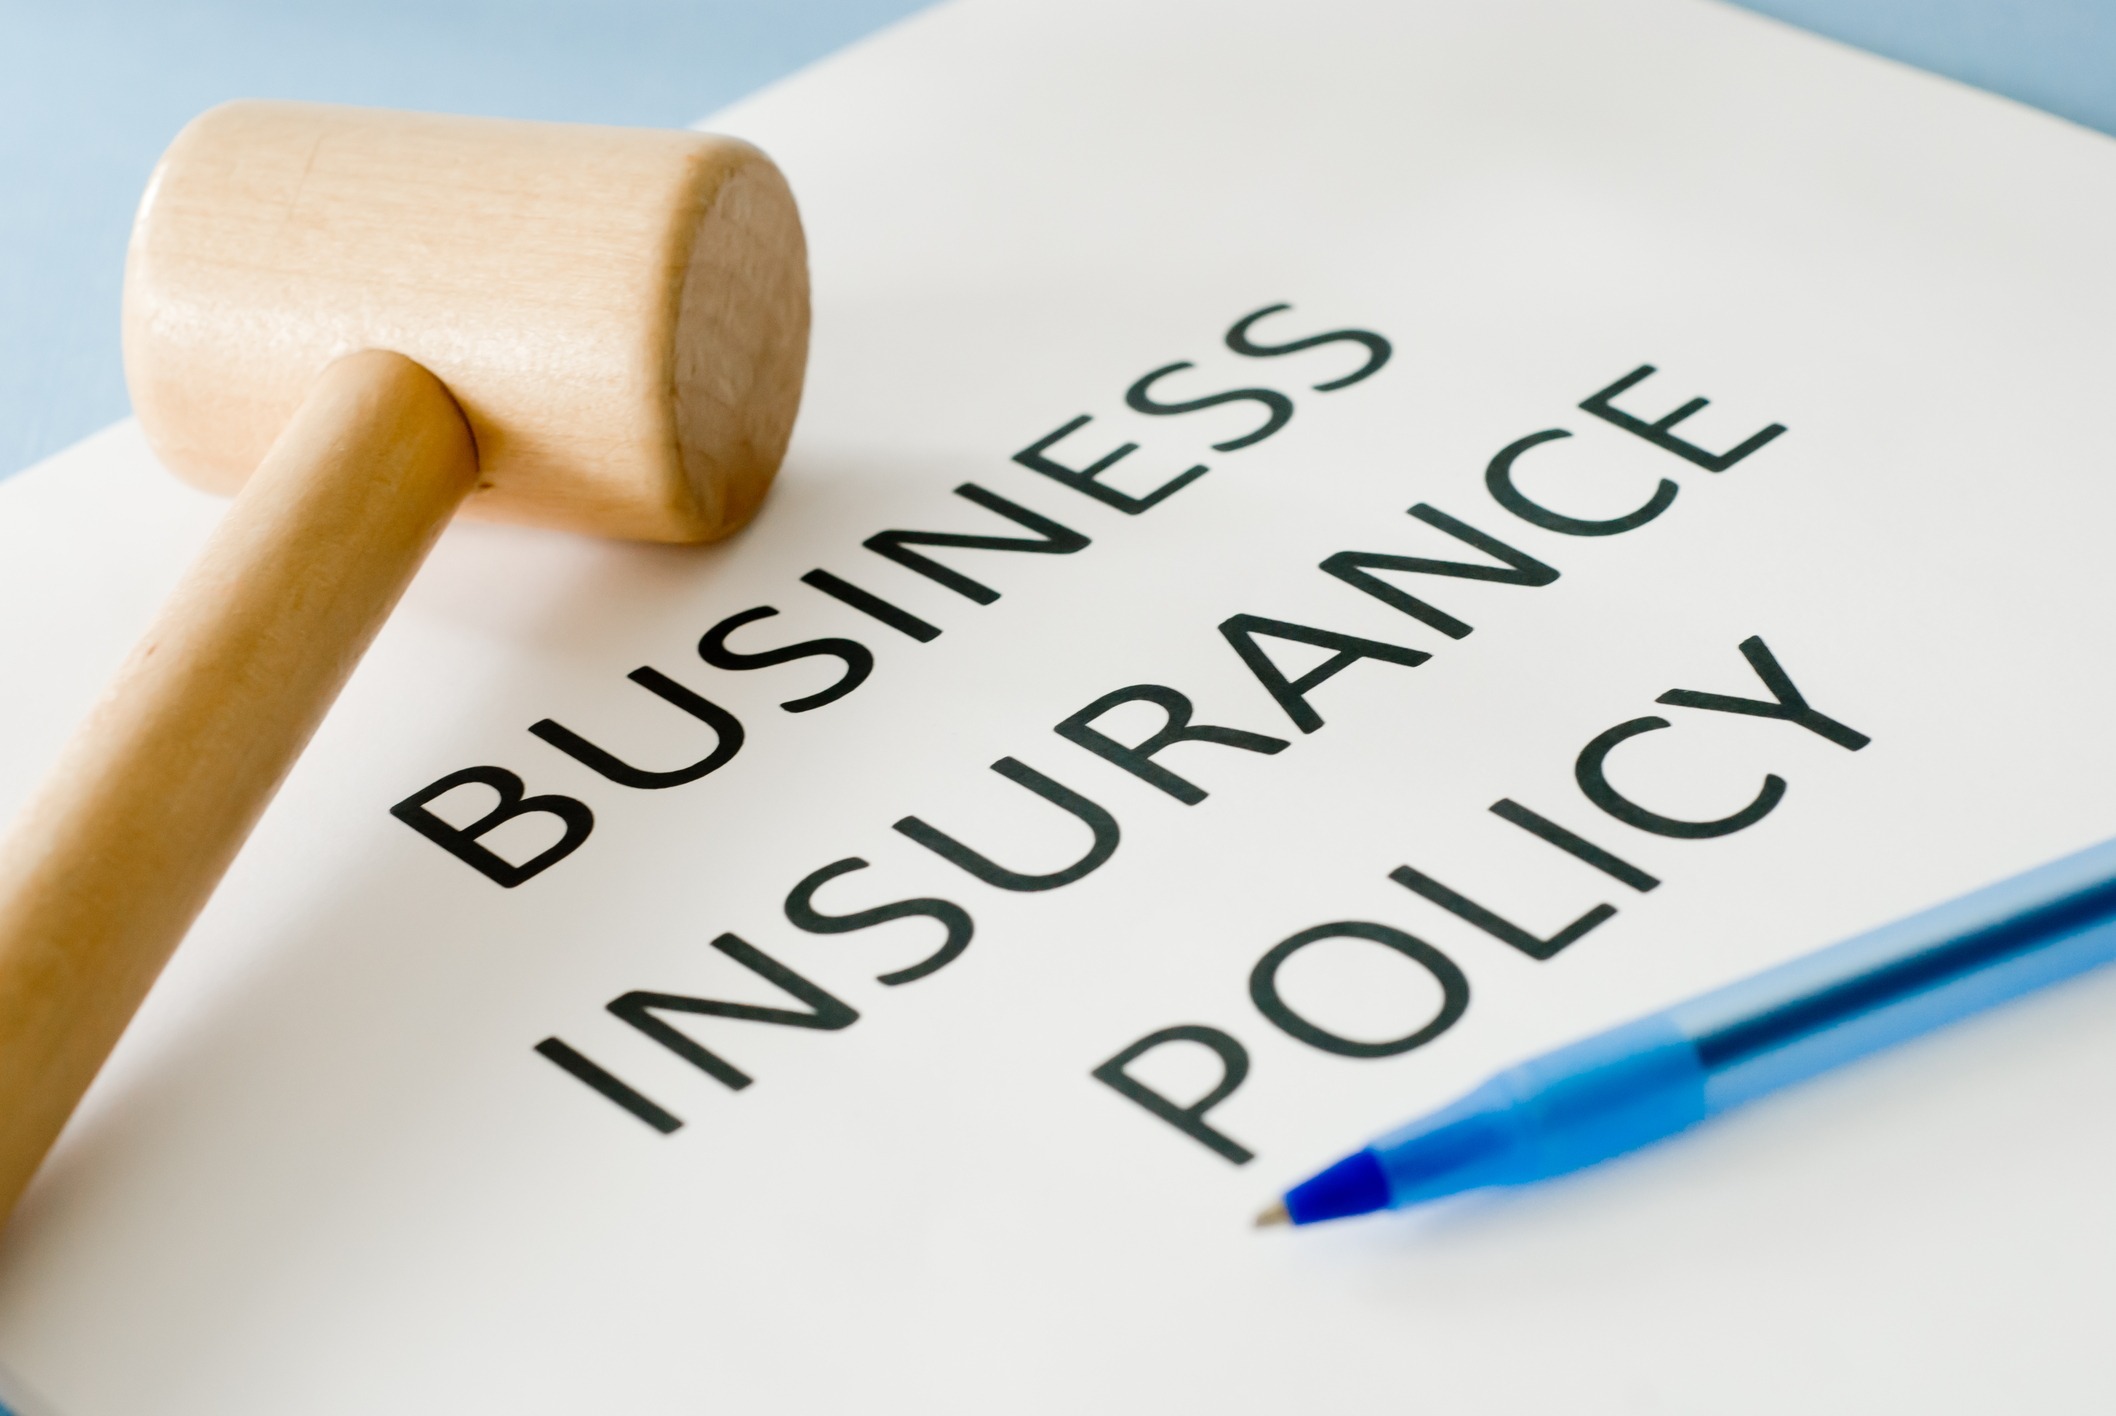 Business Insurance: Types of Insurance For Protecting Your Business